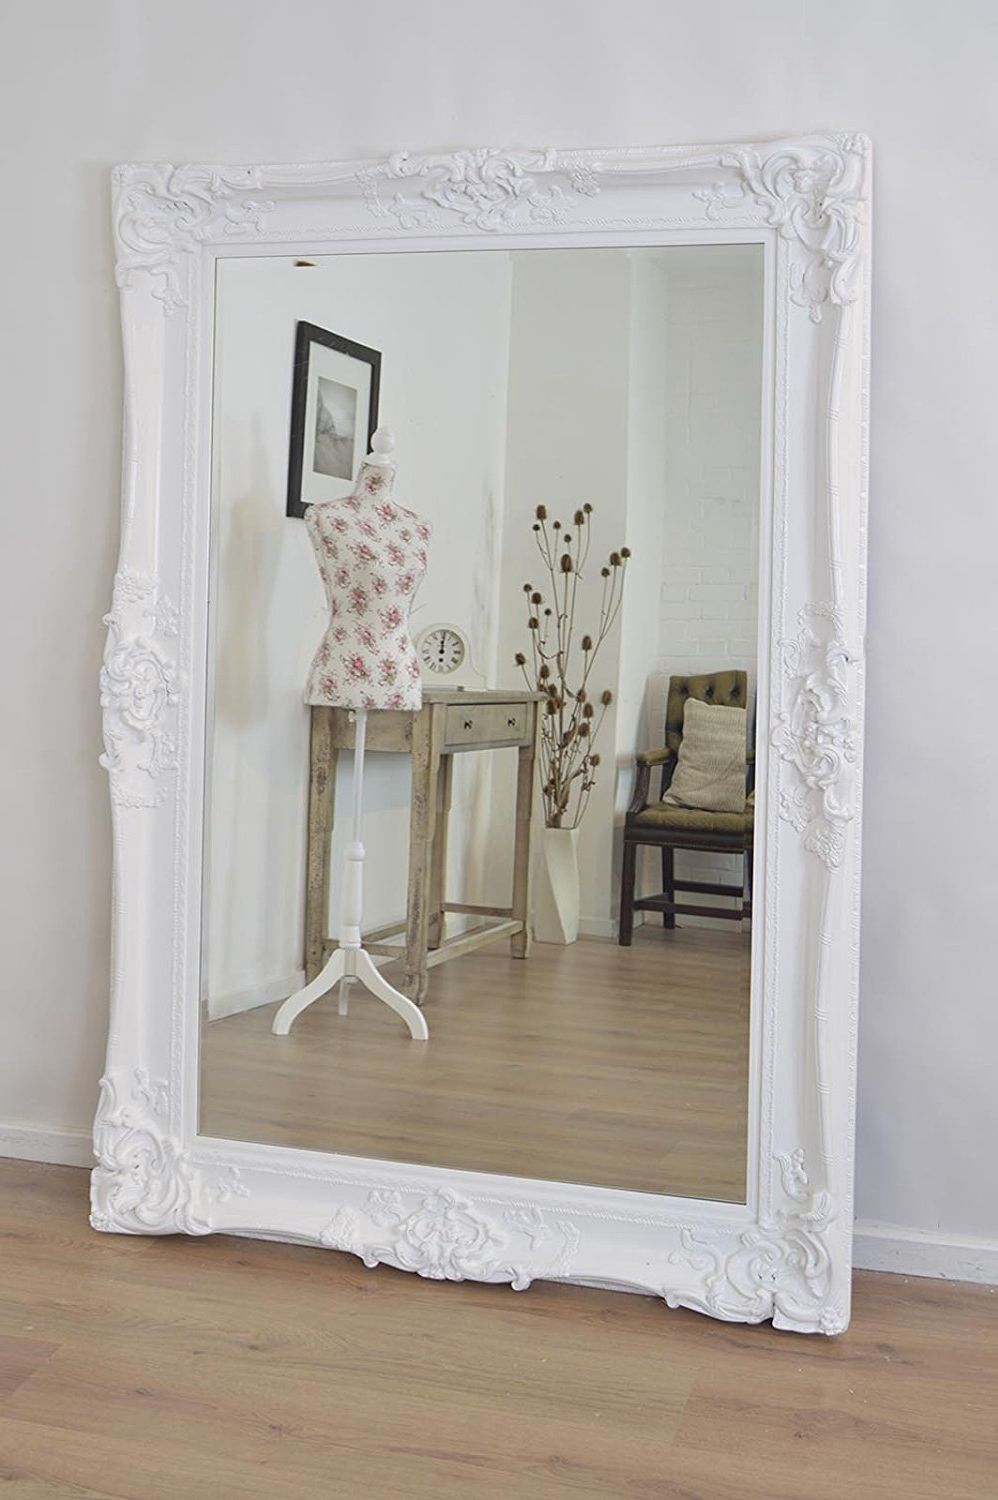 Large Ornate Wall Mirrors Intended For Most Up To Date Large Mirror Wall Mirrors Floor Decoration Decorative Round (Photo 9 of 20)